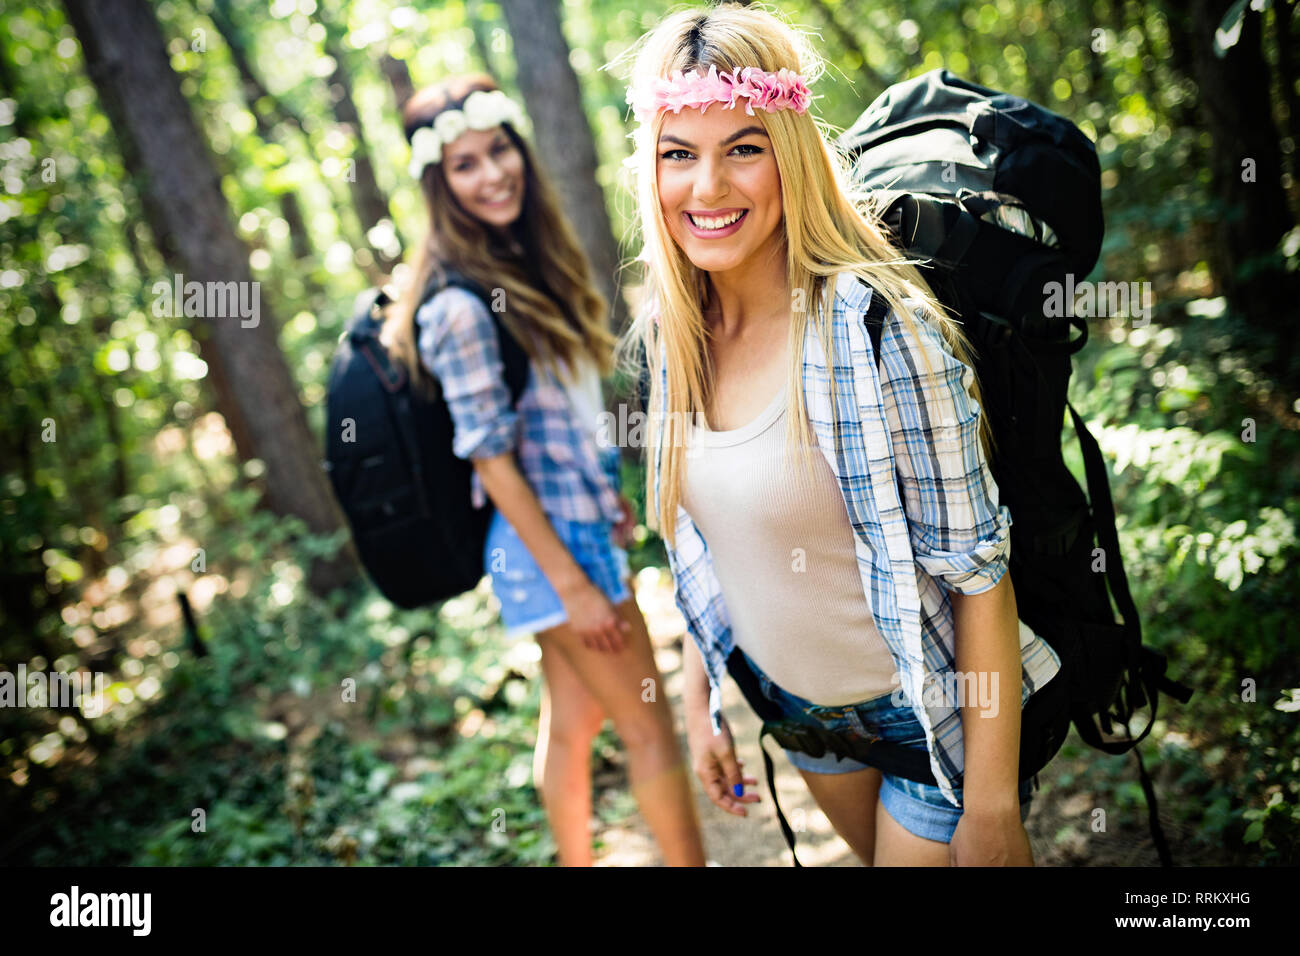 Adventure, travel, tourism, hike and people concept. Happy woman walking with backpacks in woods Stock Photo